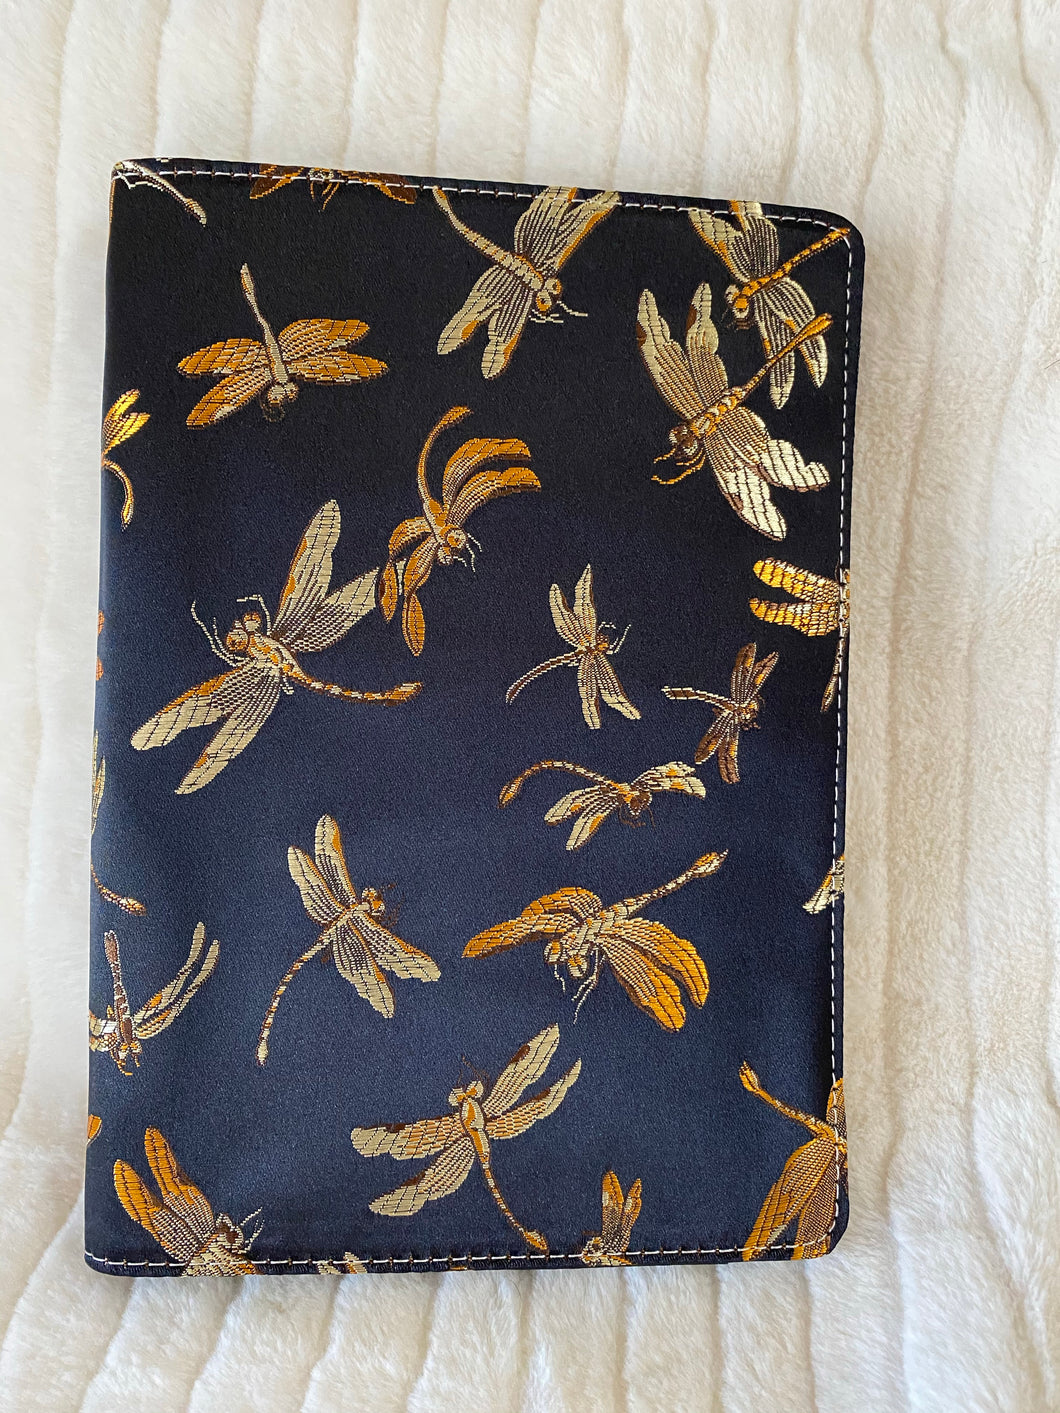 A5 Vibrant Dragonfly Cover